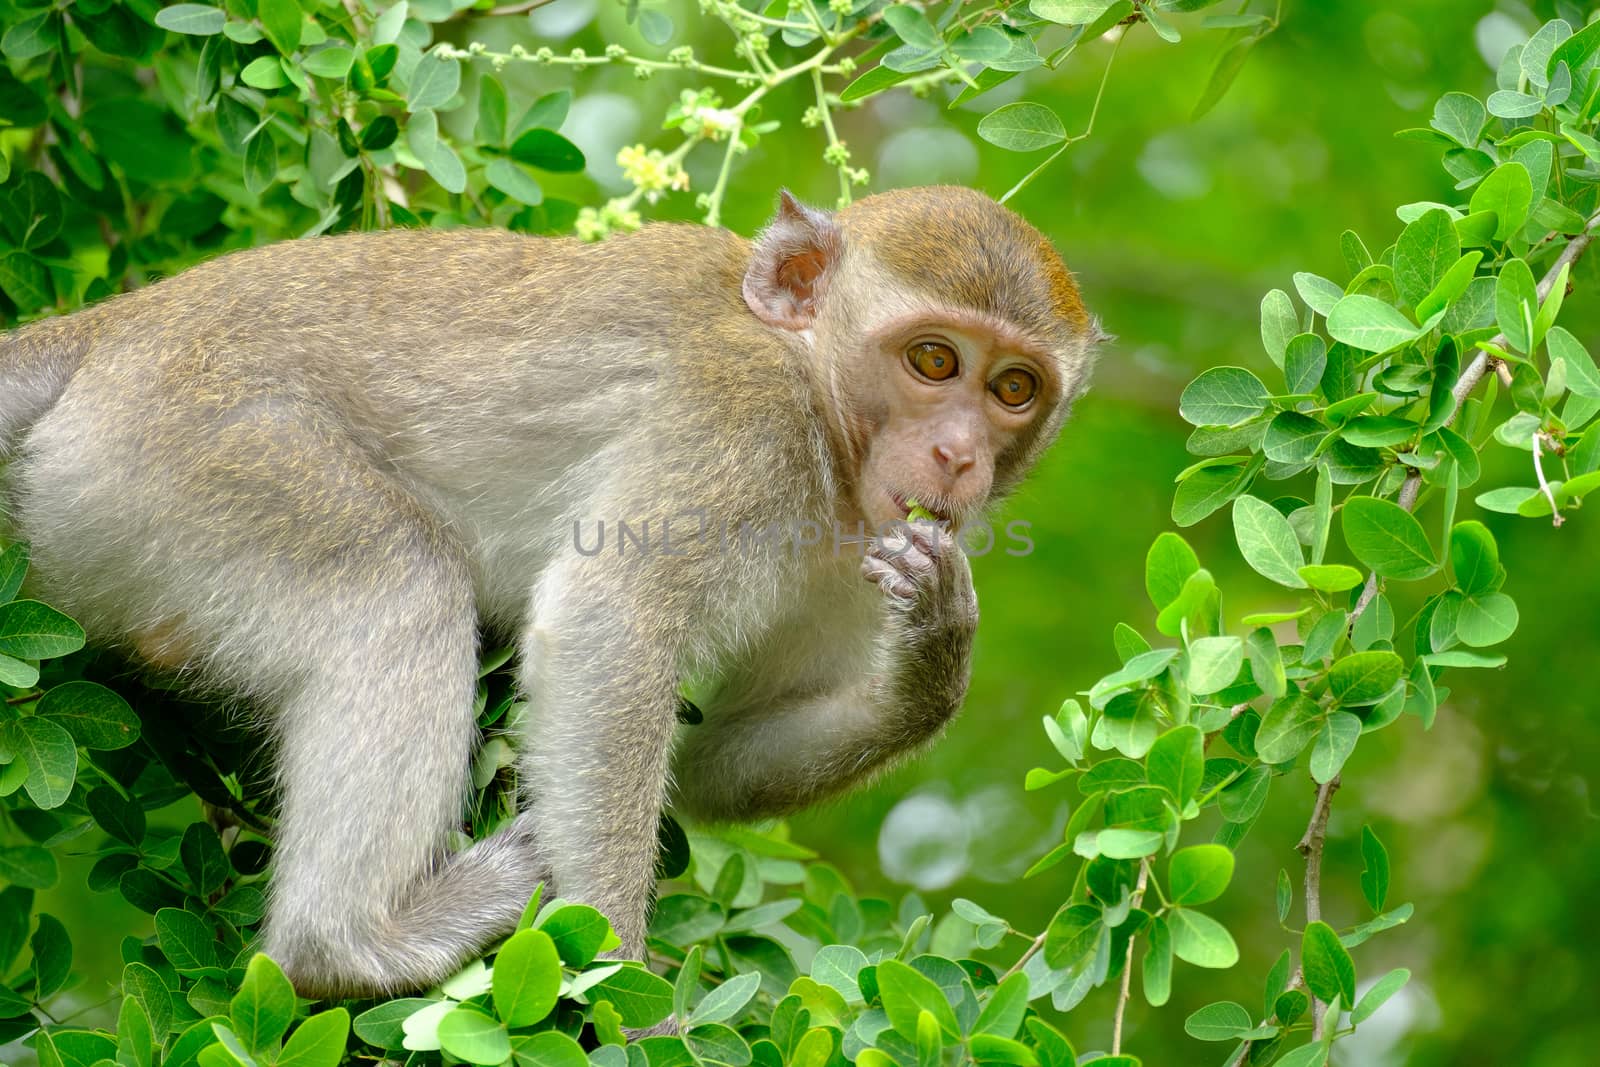 Monkey is eating leaf and sitting on a tree , lives in a natural forest of Thailand.